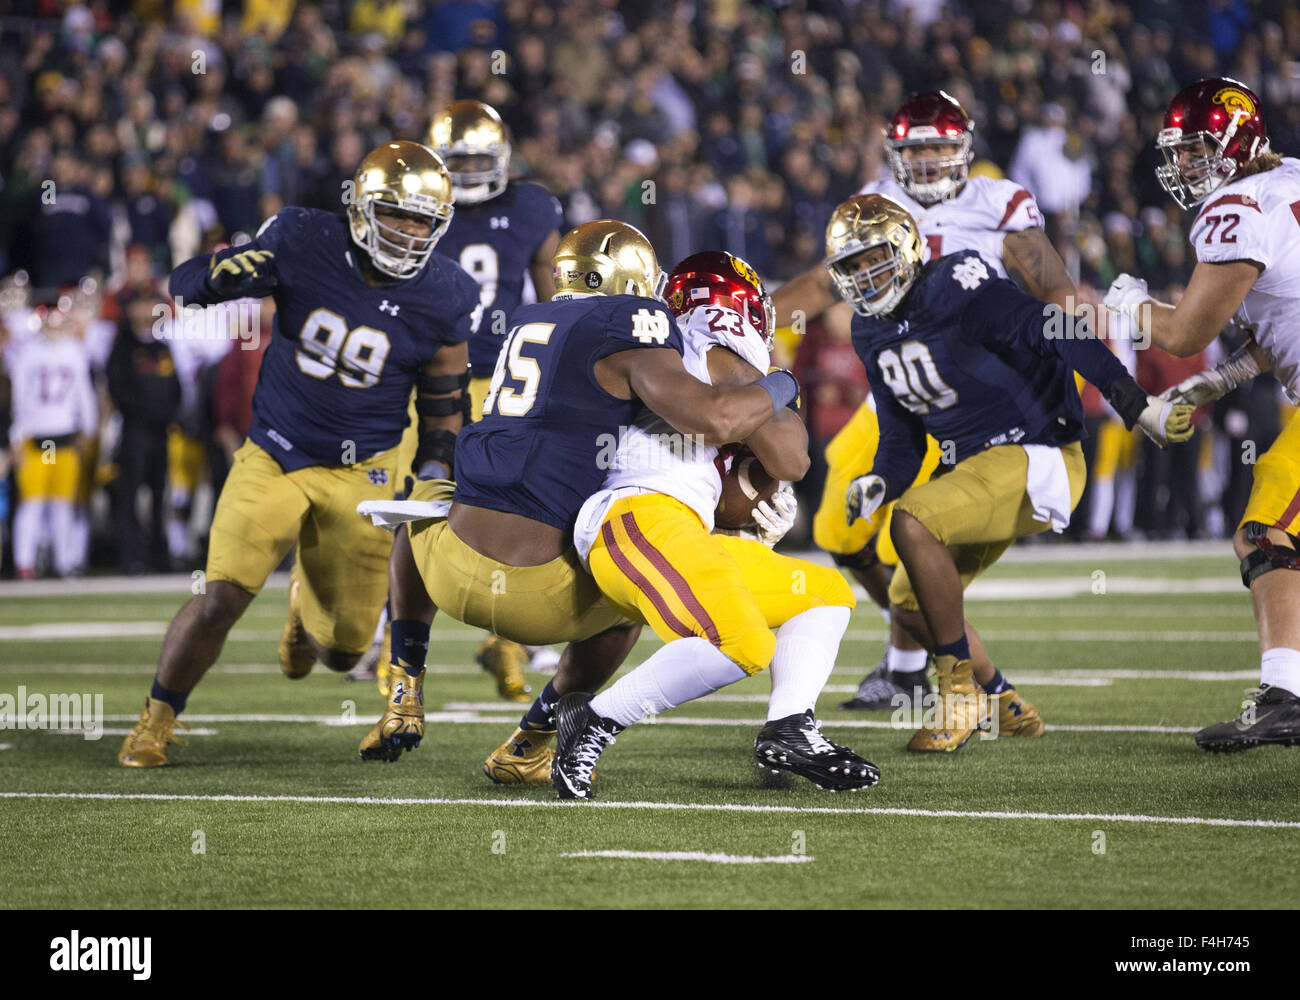 South Bend, Indiana, USA. 17th Oct, 2015. Notre Dame defensive lineman Romeo Okwara (45) tackles USC running back Tre Madden (23) during NCAA football game action between the USC Trojans and the Notre Dame Fighting Irish at Notre Dame Stadium in South Bend, Indiana. Notre Dame defeated USC 41-31. John Mersits/CSM. © csm/Alamy Live News Stock Photo